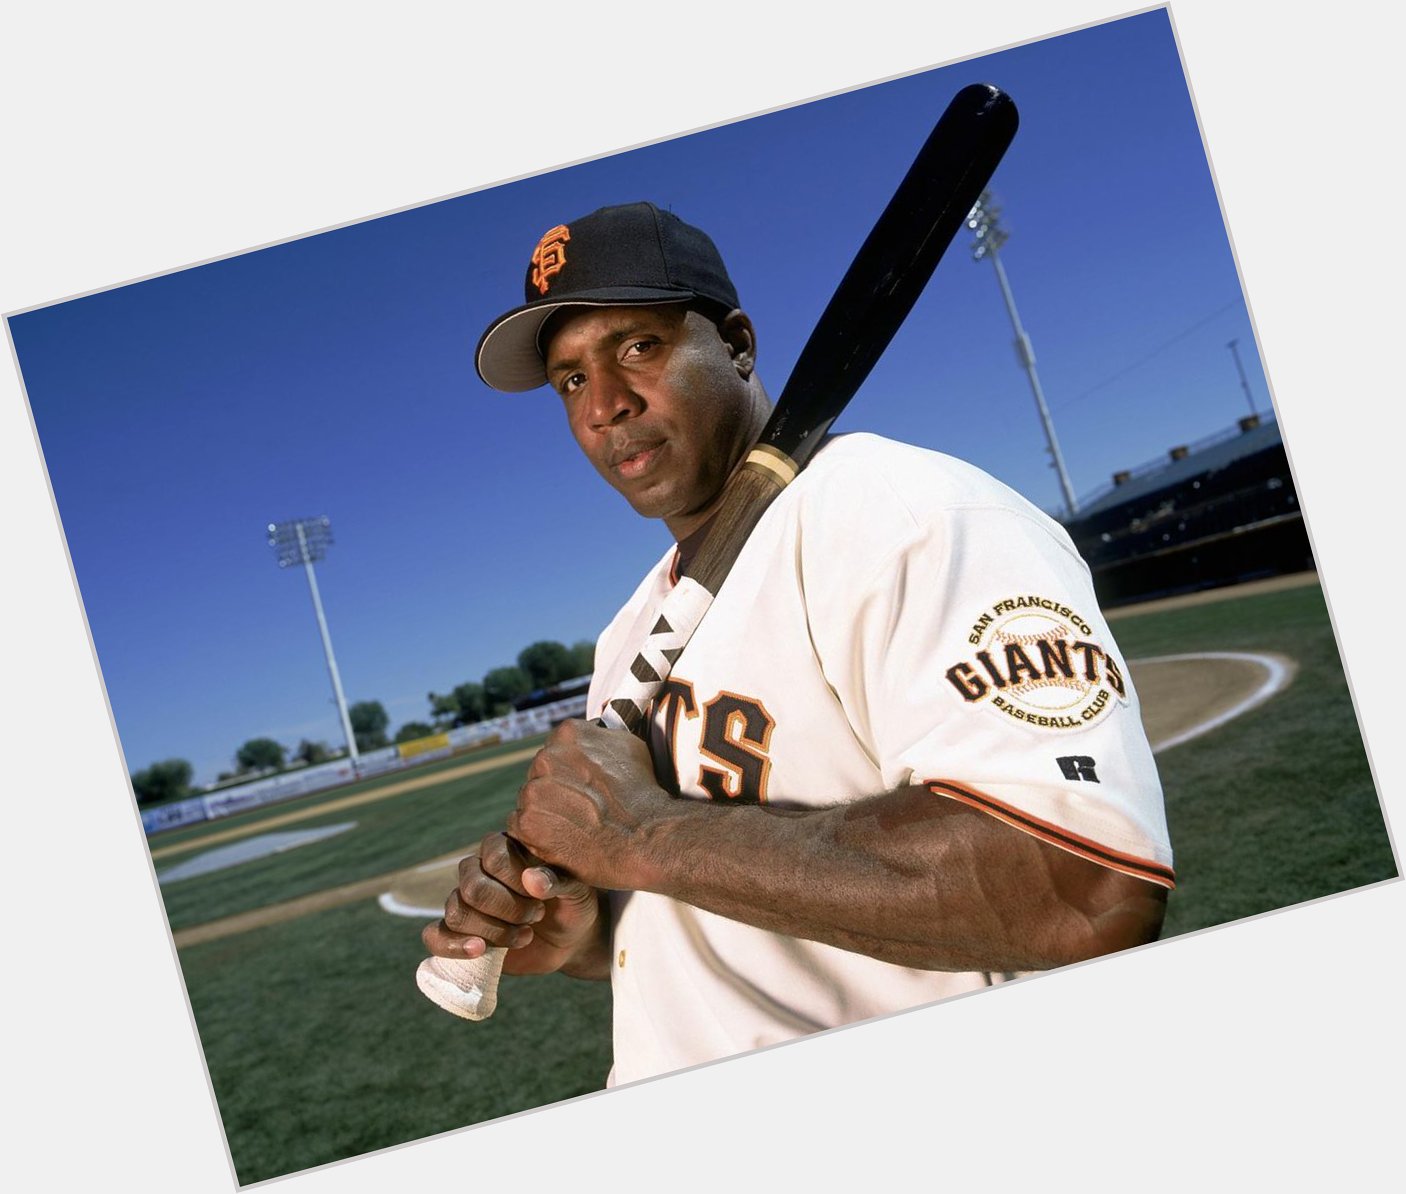 Happy birthday Barry Bonds! He was a 14x All-Star and 7x NL MVP! A legendary figure in the sport of baseball.  